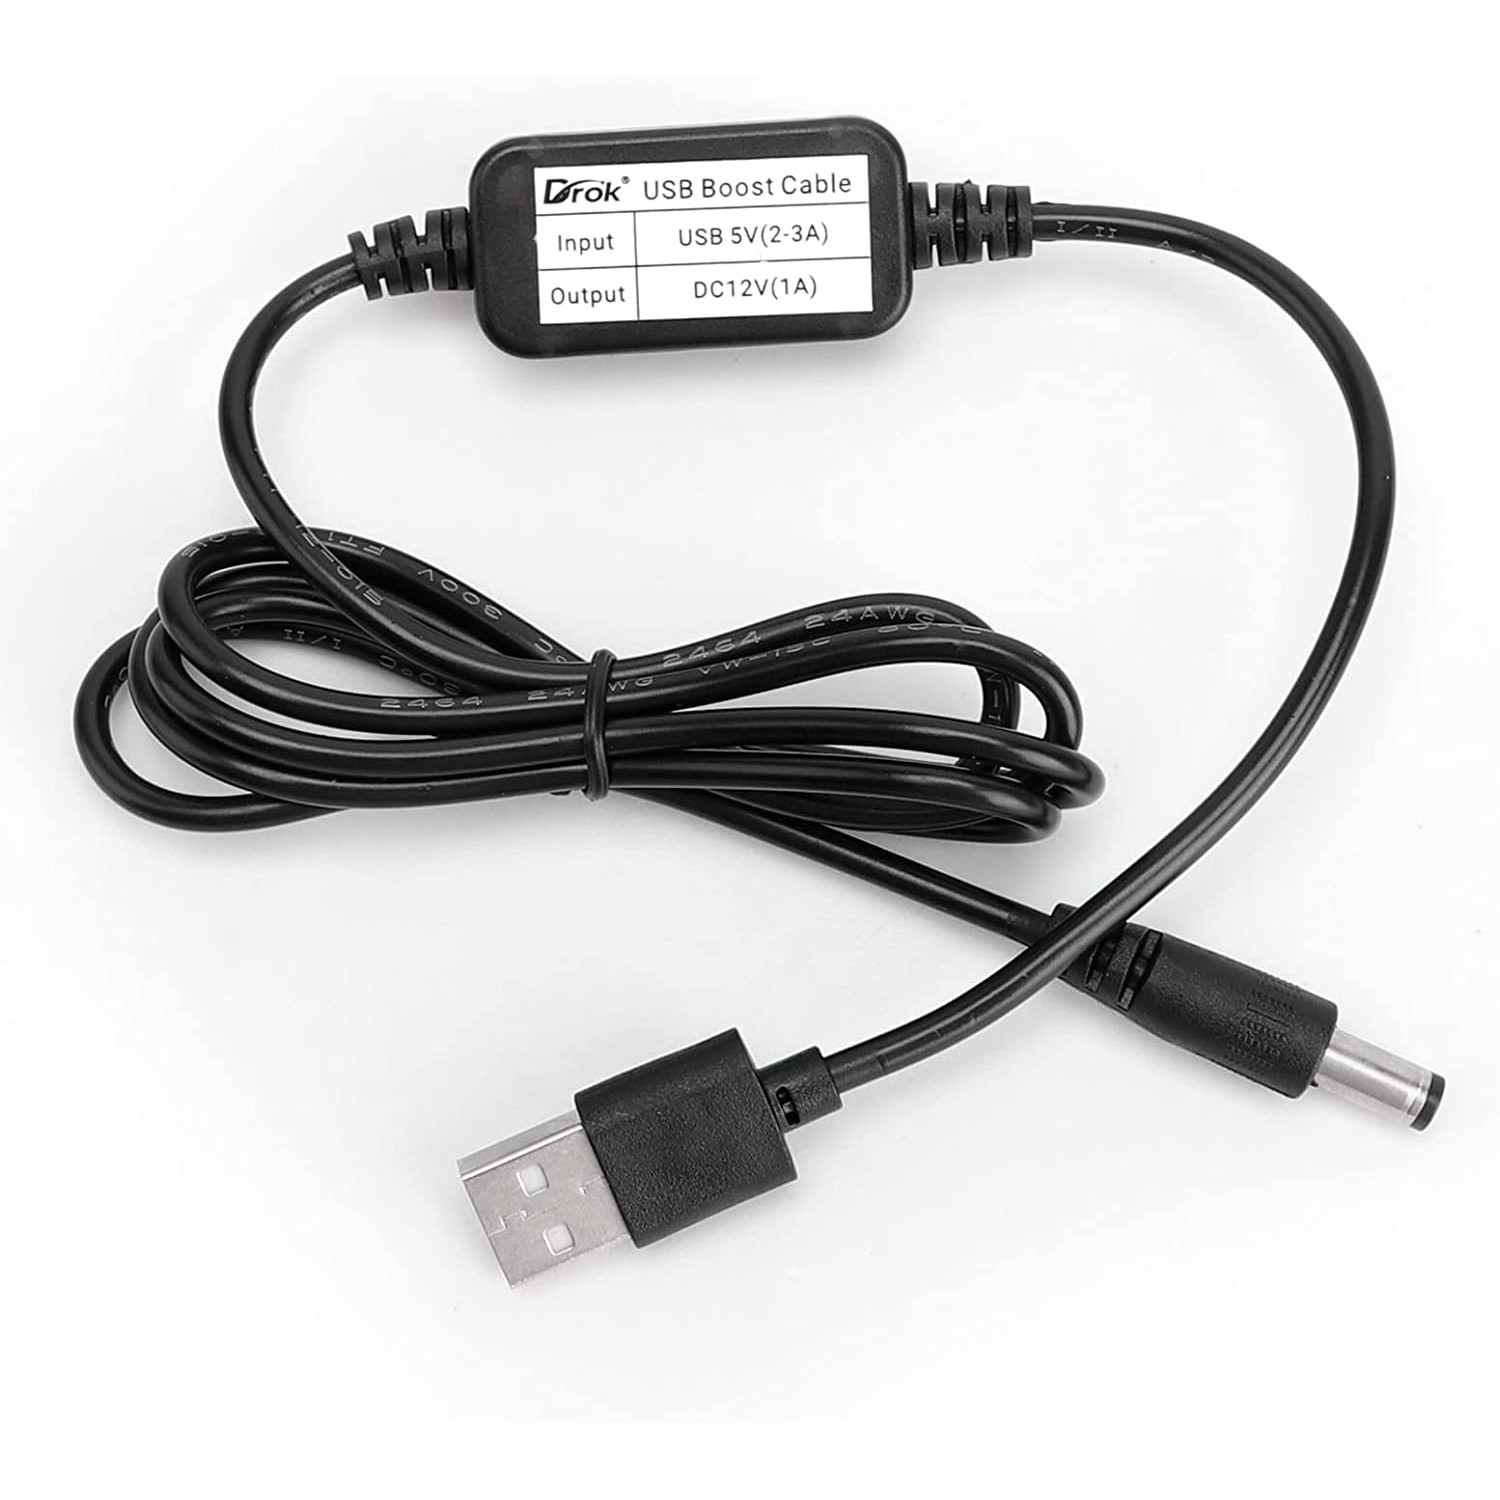 USB to 12v, DROK 5v to 12v USB Cable Boost Converter Step Up to